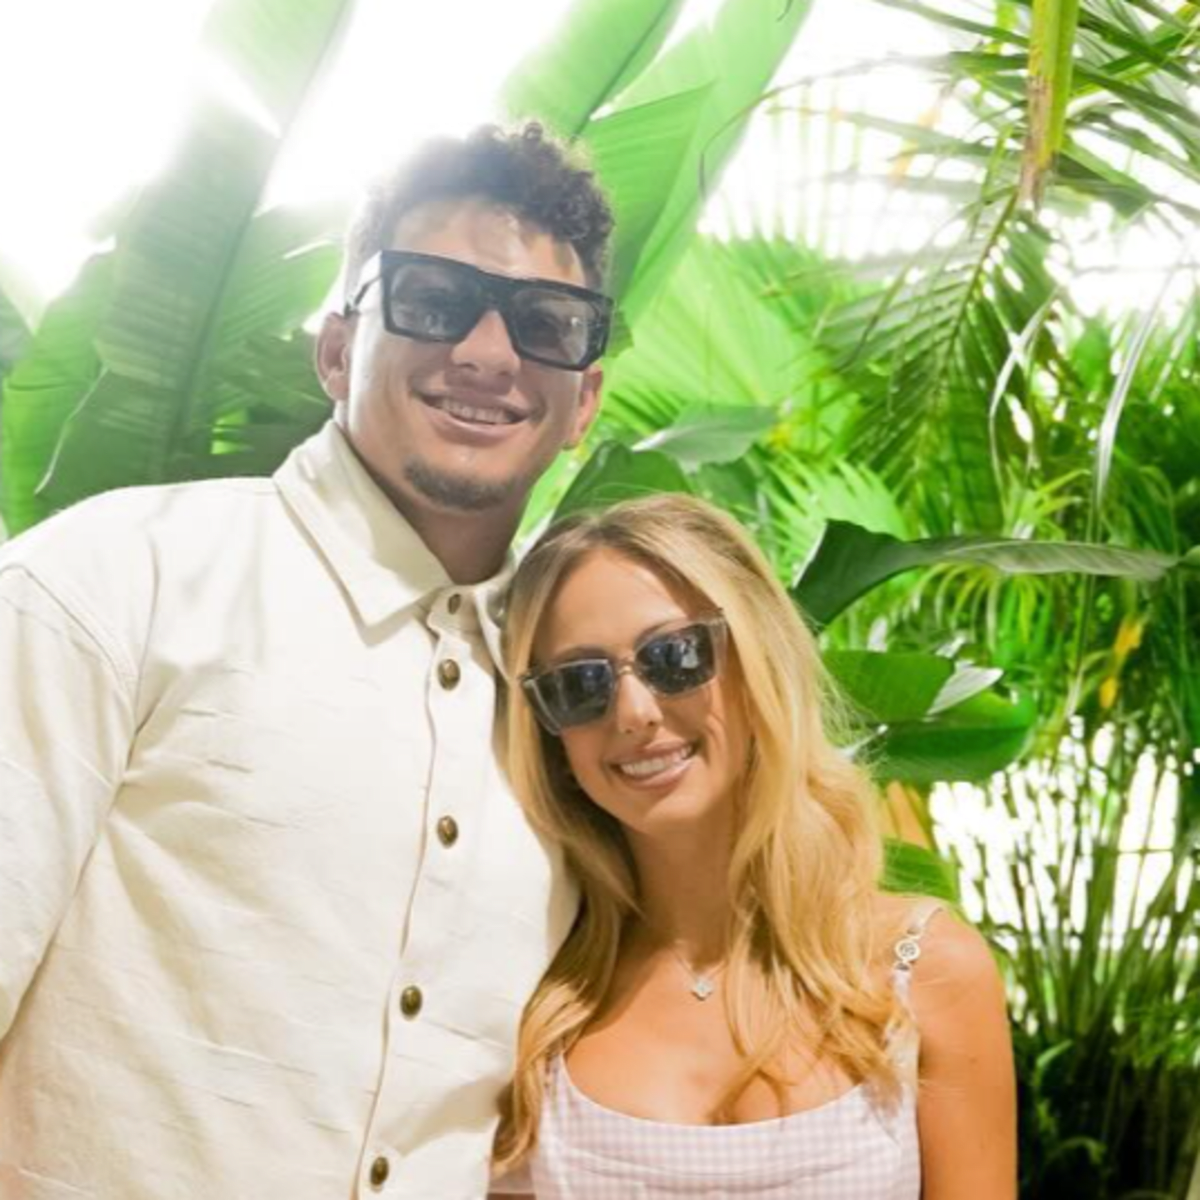 Brittany Mahomes Goes Viral For Her Outfit At Miami Grand Prix - The Spun